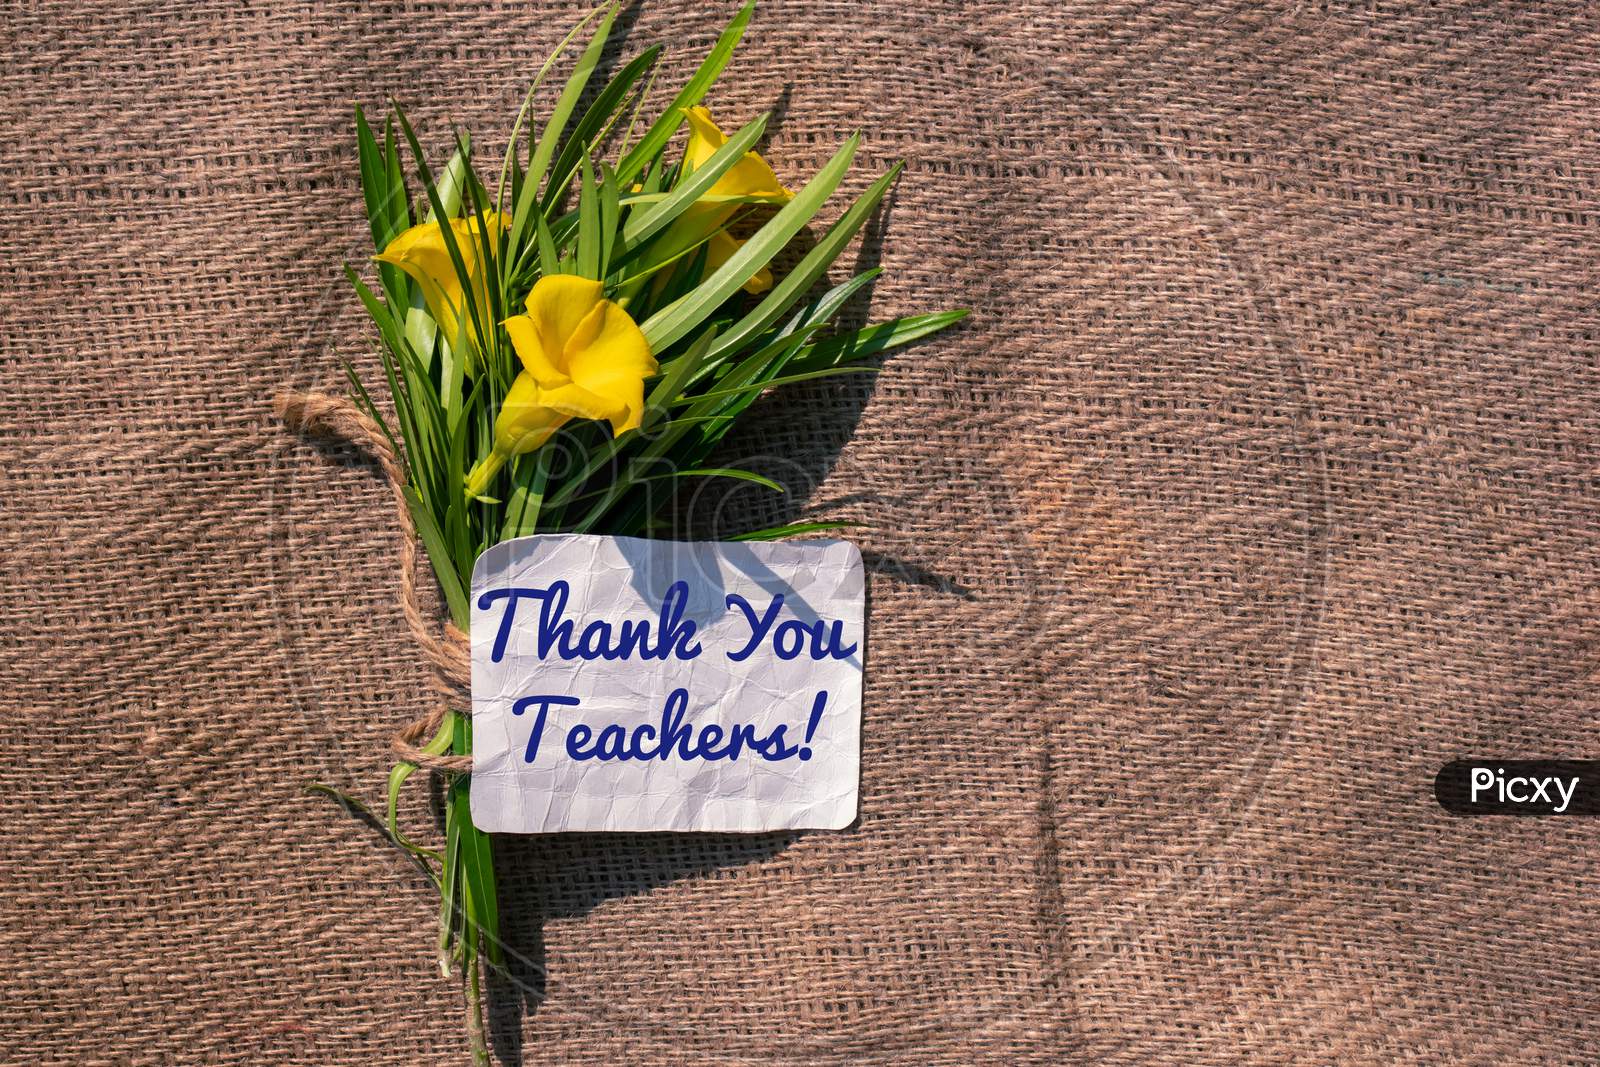 Thank You Teachers Note With Yellow Oleander Flowers On Burlap Fabric